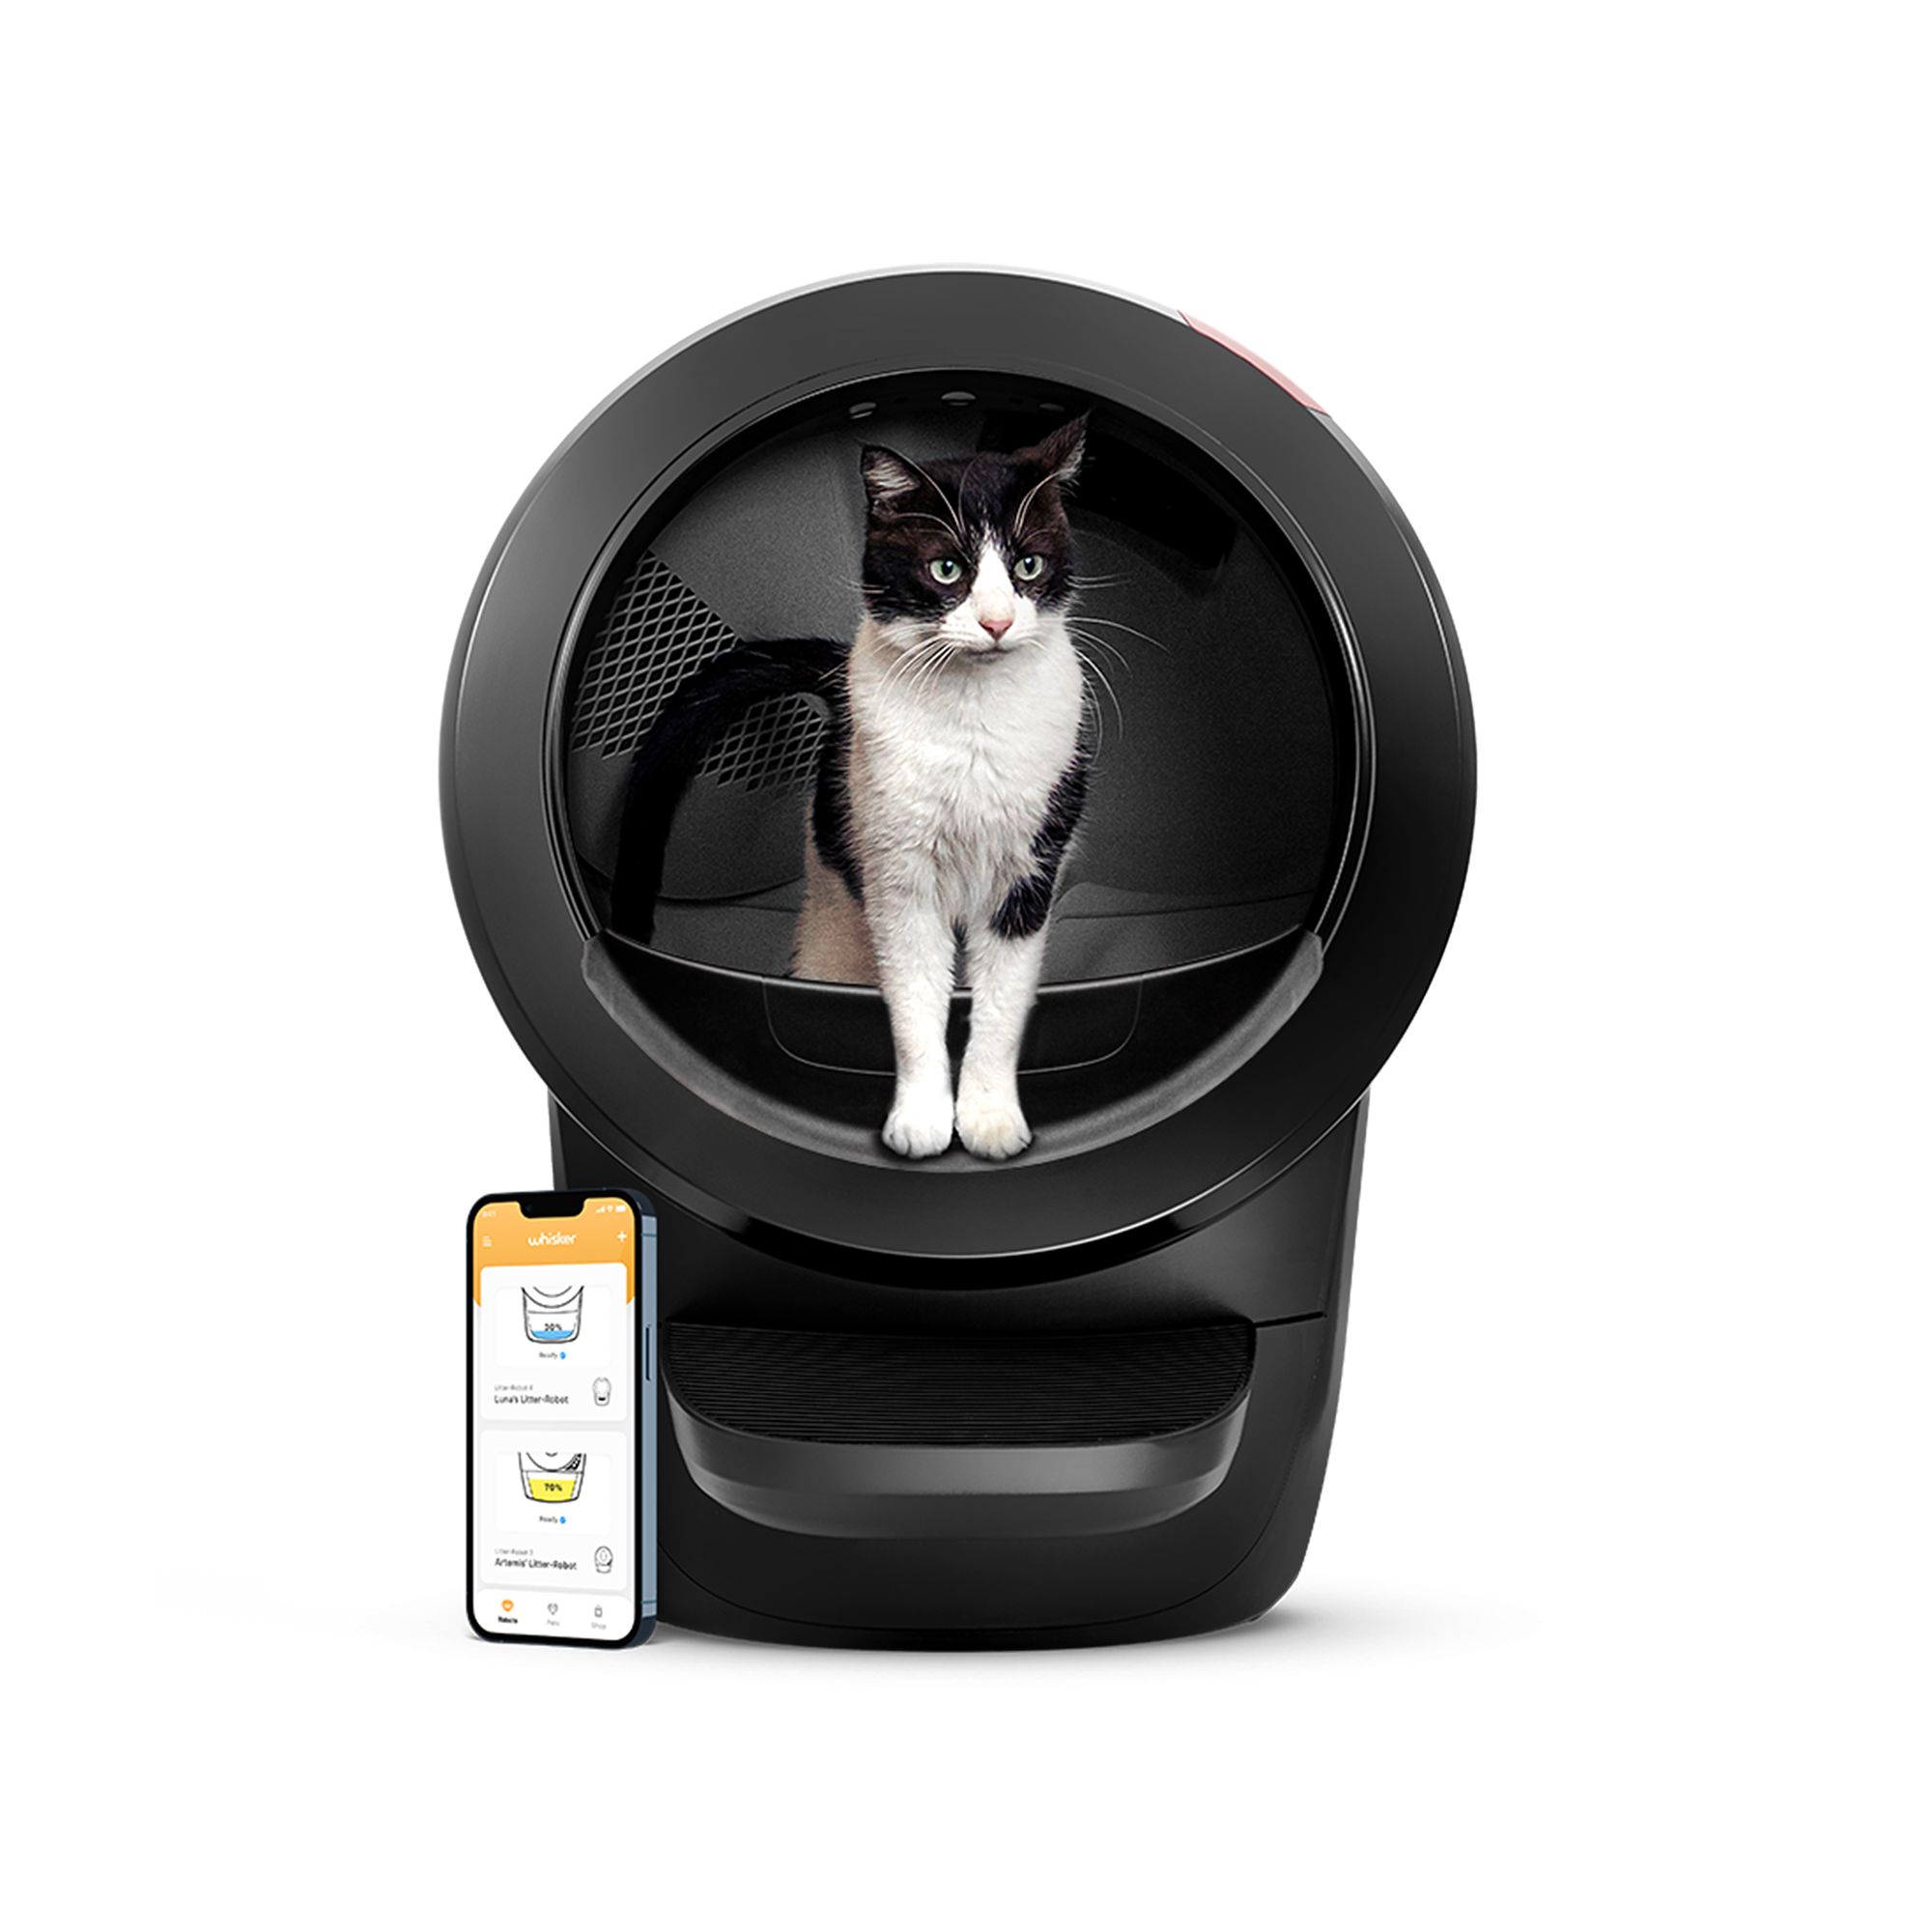 Litter-Robot® 4 Automatic Self-Cleaning Cat Litter Box by Whisker